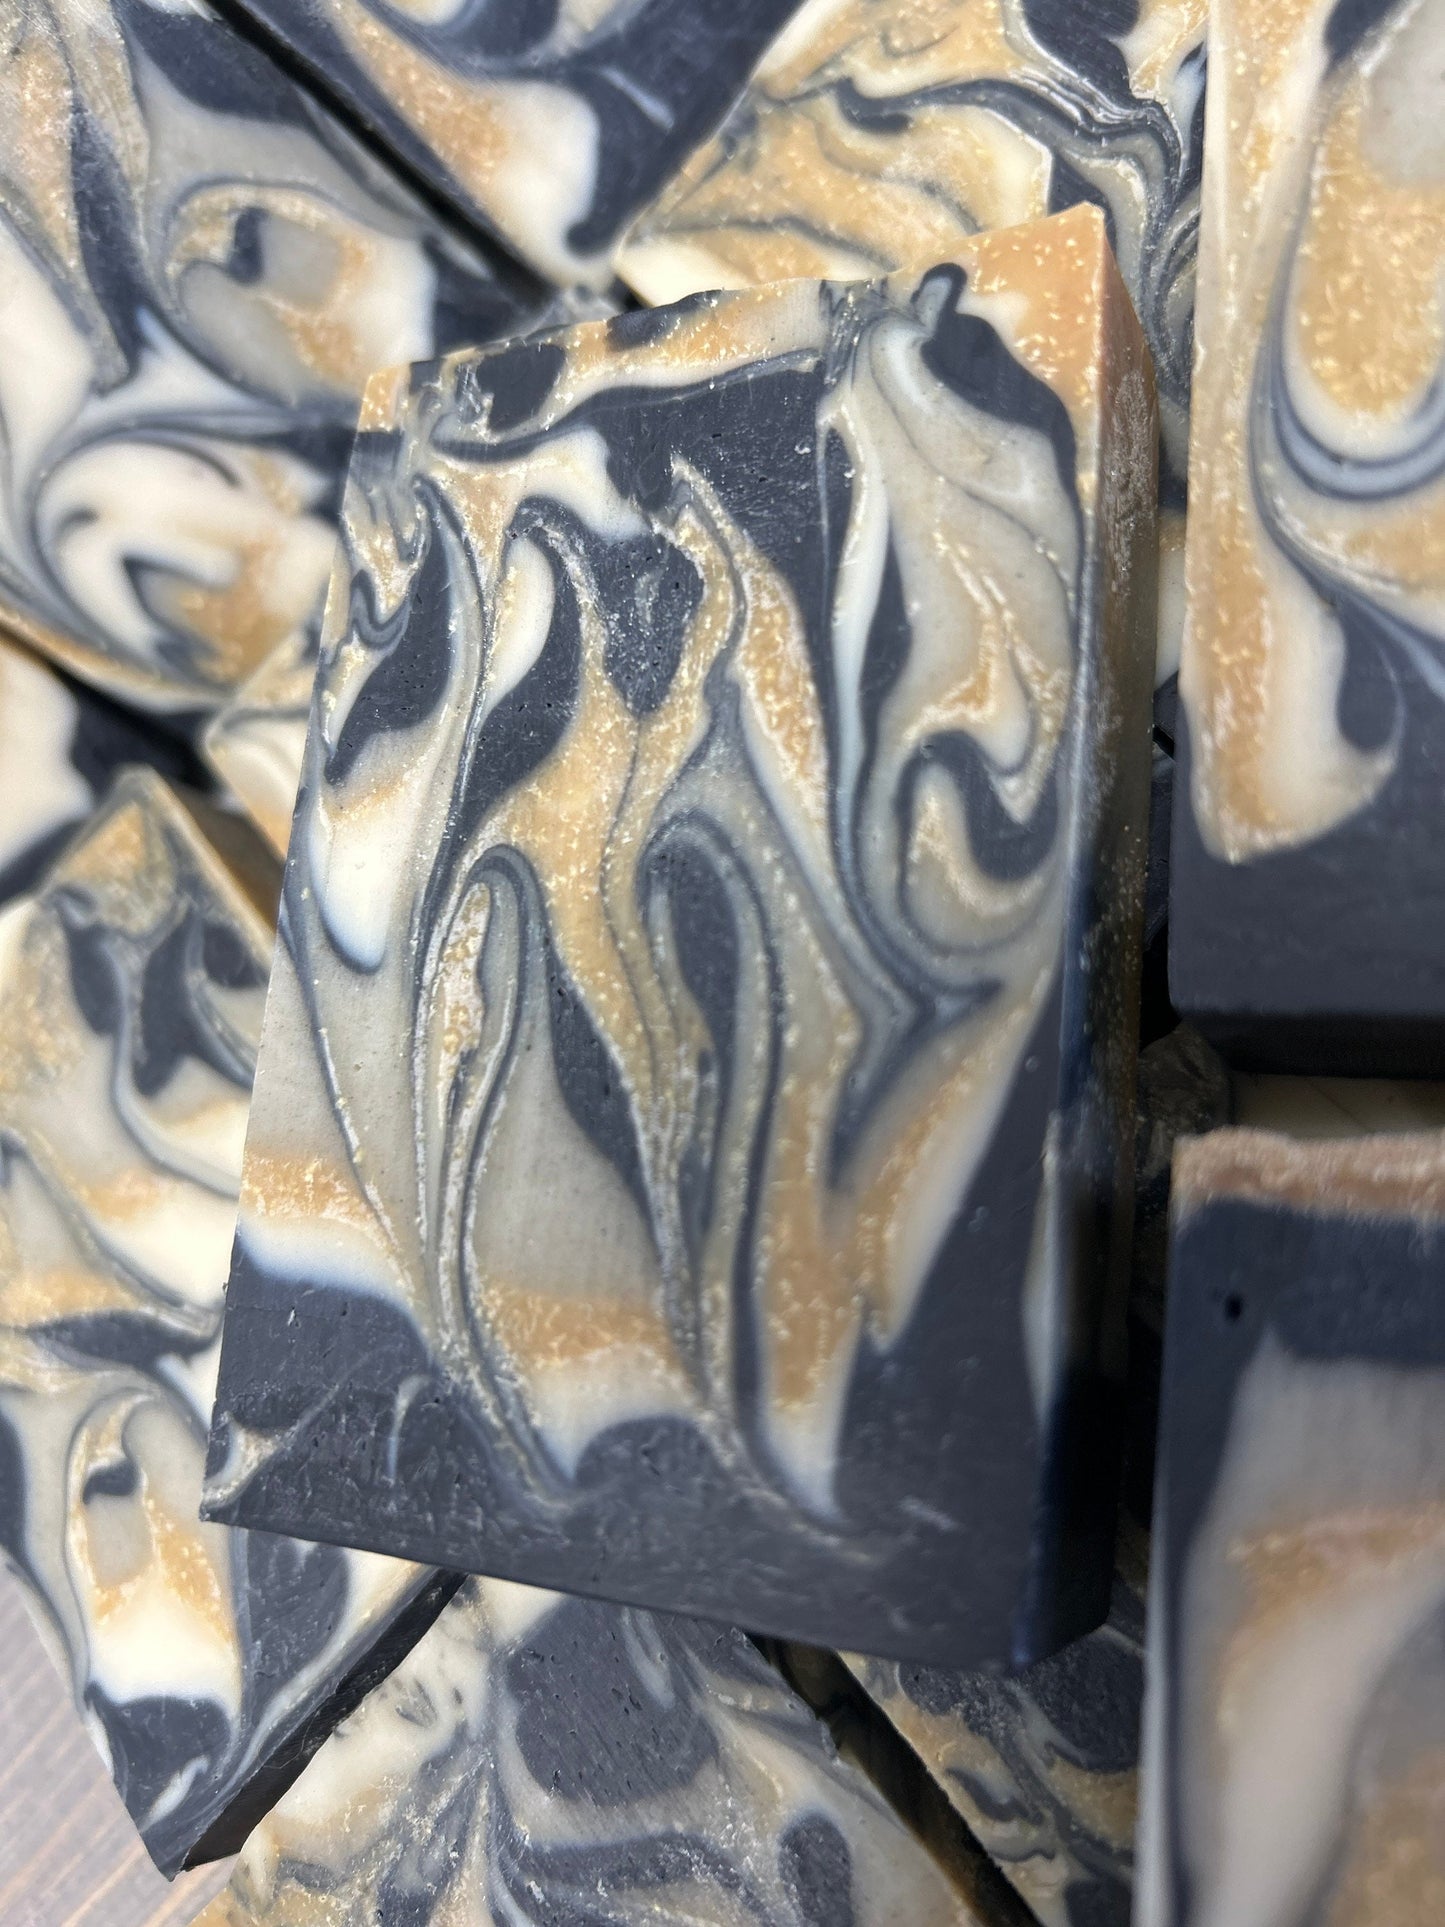 Sulfur Soap, Bentonite Clay, Activated Charcoal, Tea Tree EO and Lemon EO 5.5 oz Bar Soap, leaves your skin clean!